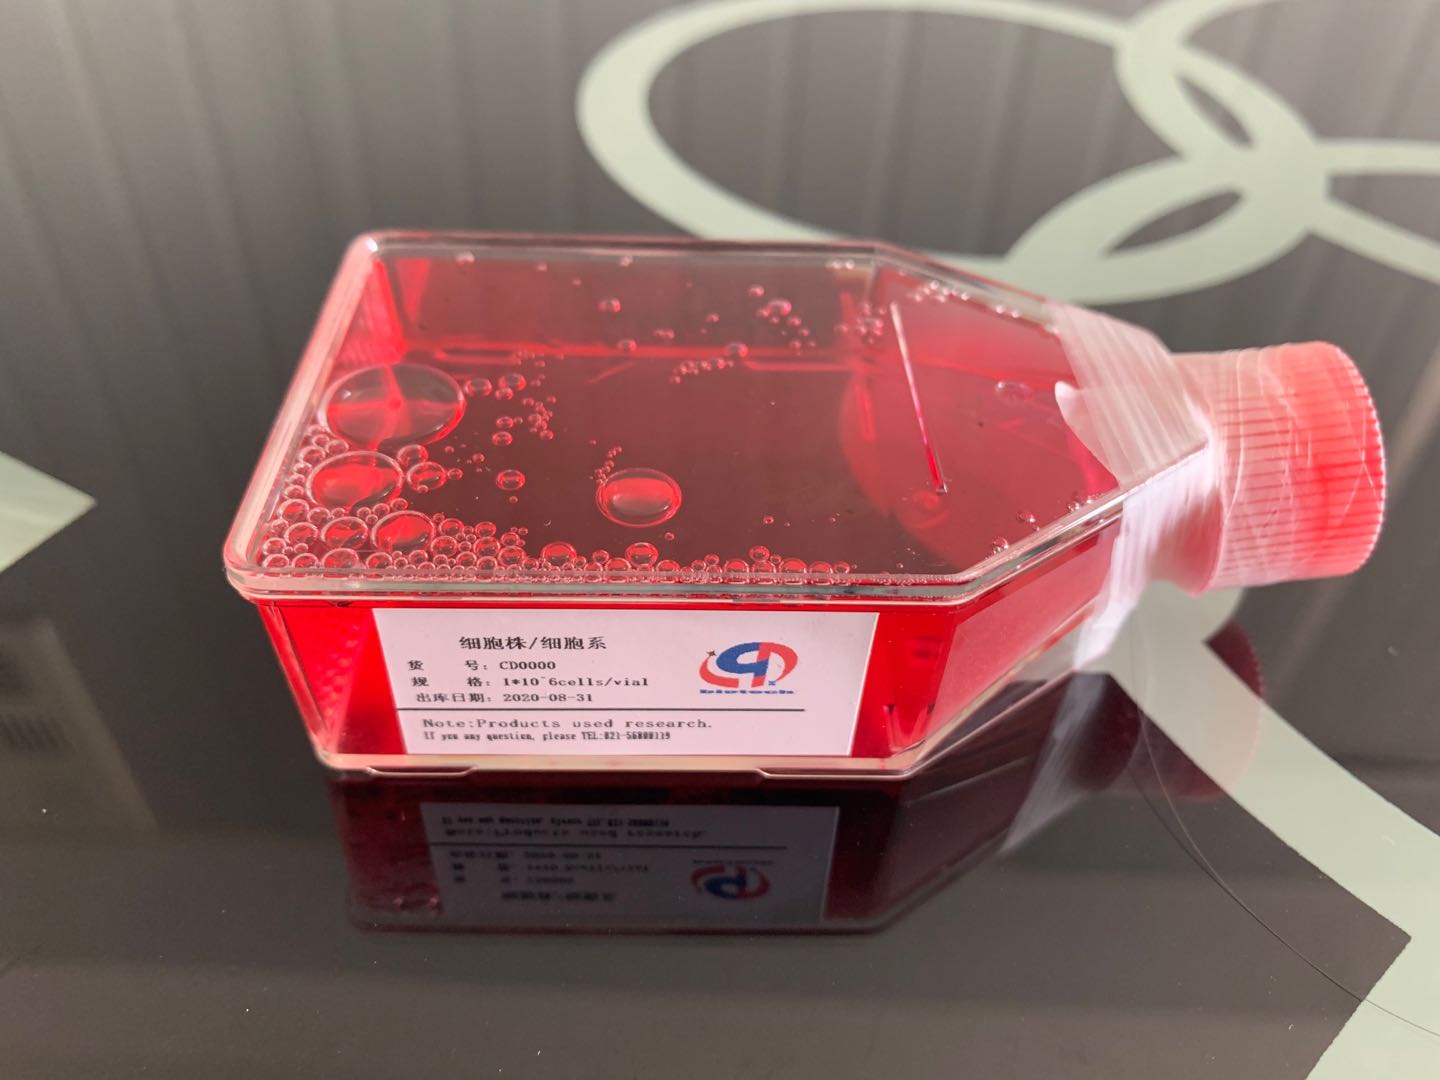 Cell Culture Is No Trivial Matter (1)
